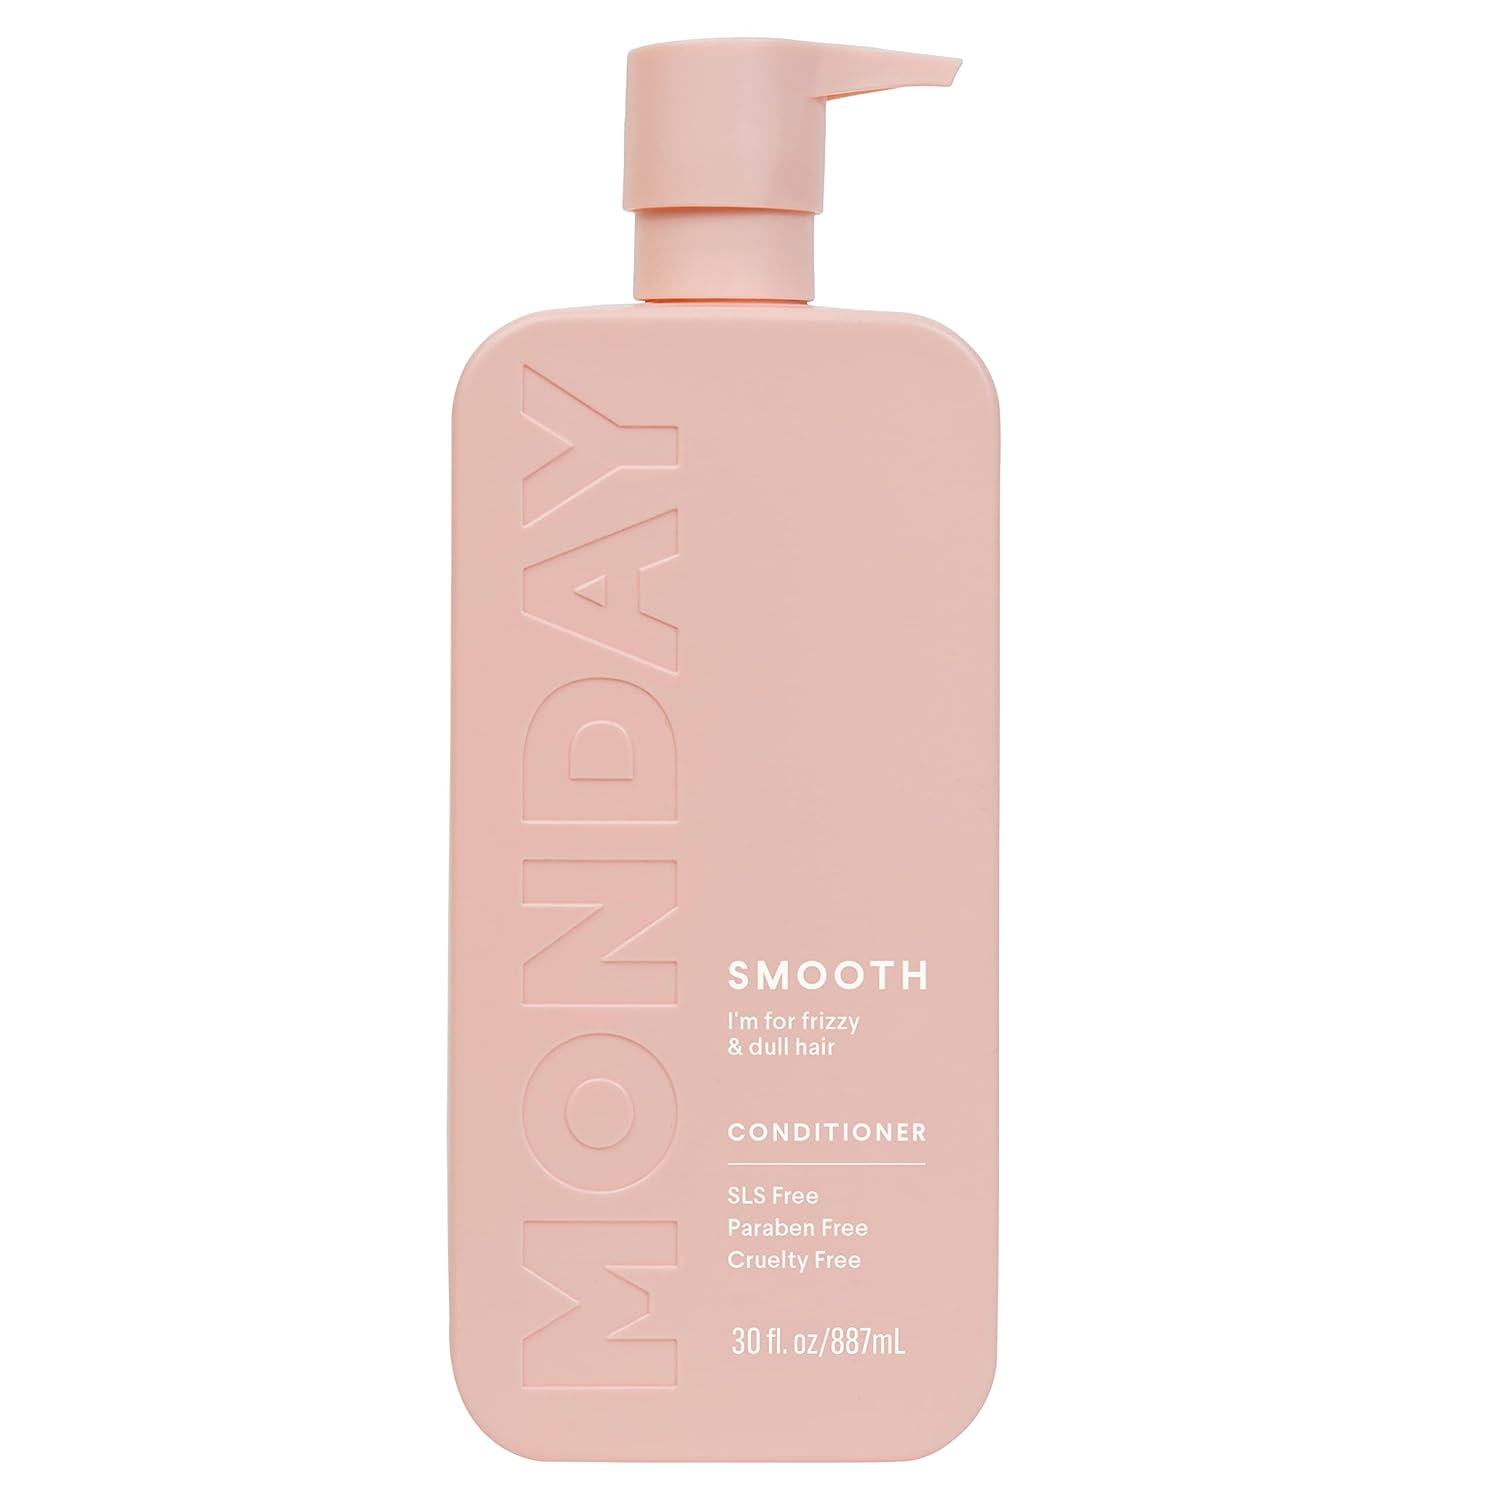 MONDAY HAIRCARE Smooth Conditioner